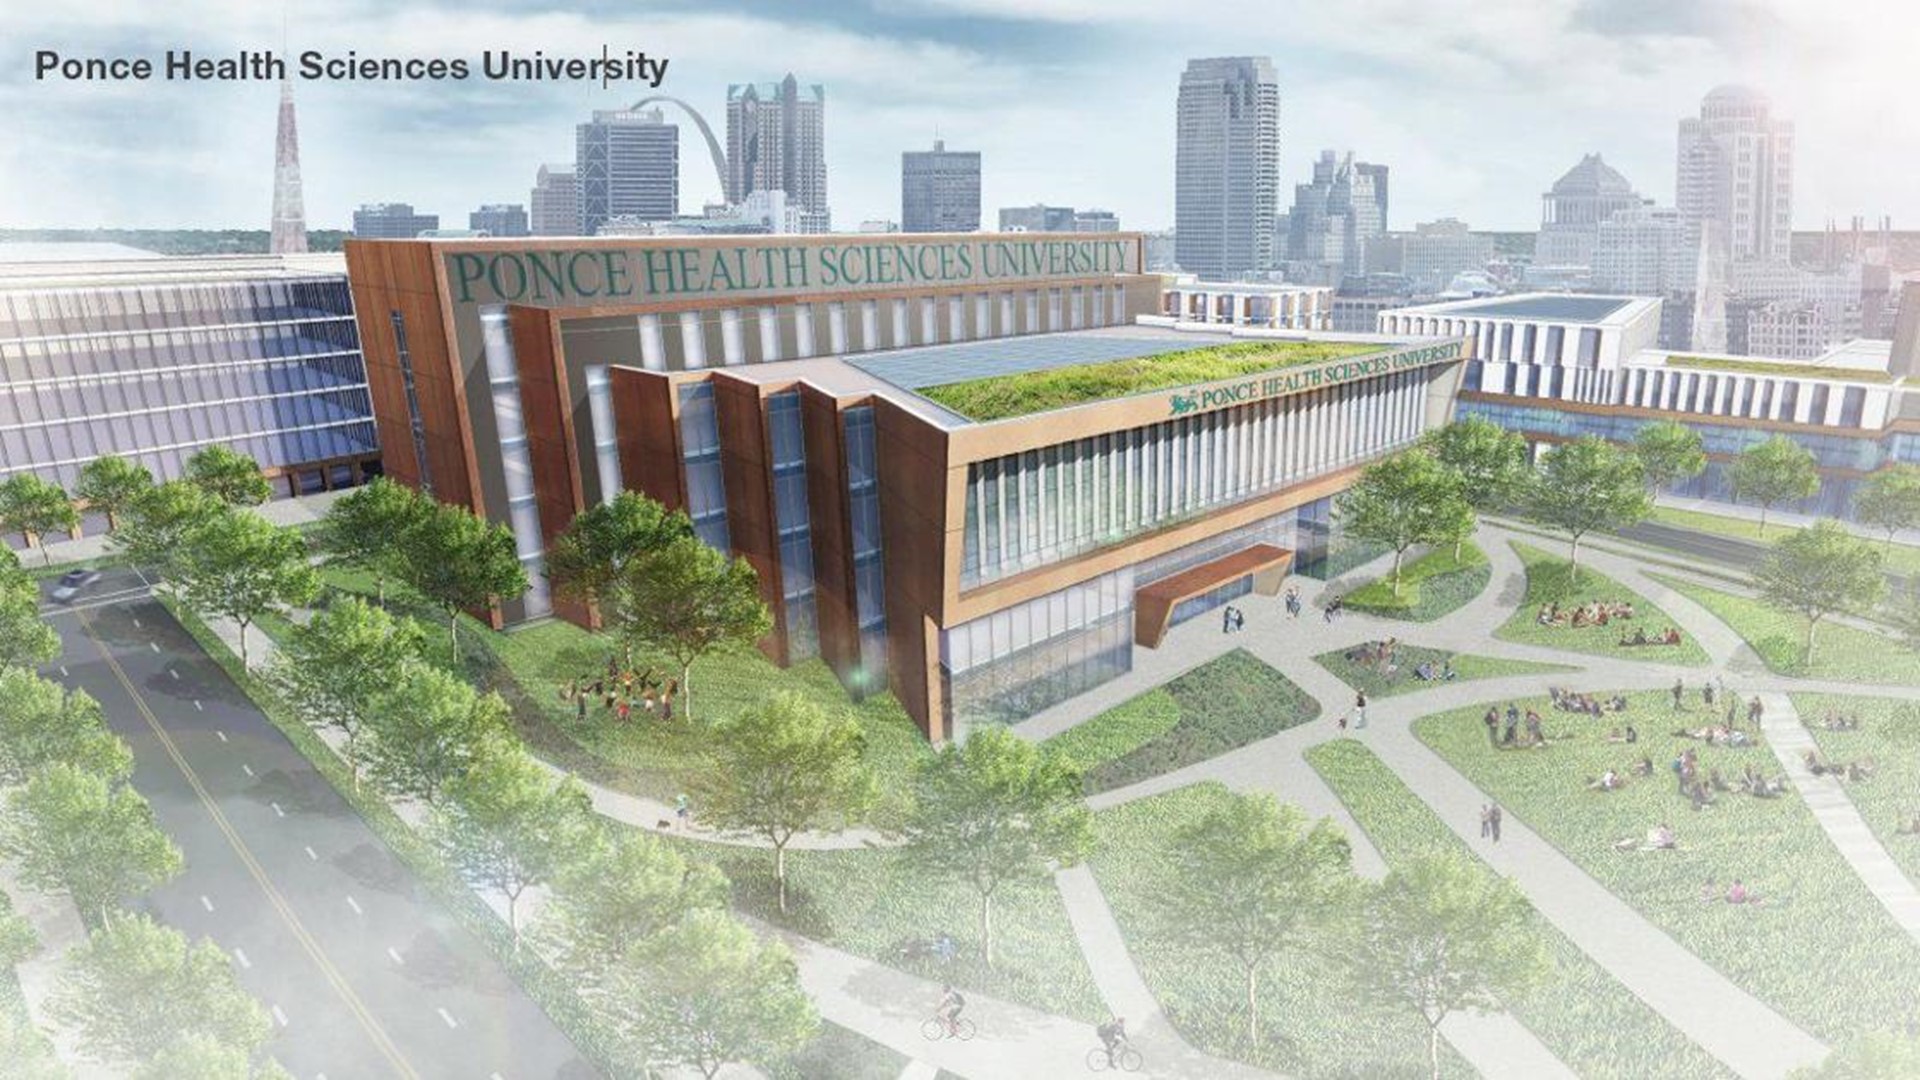 Ponce Health Sciences University is building a school in North St. Louis to help curb racial disparities in health care.